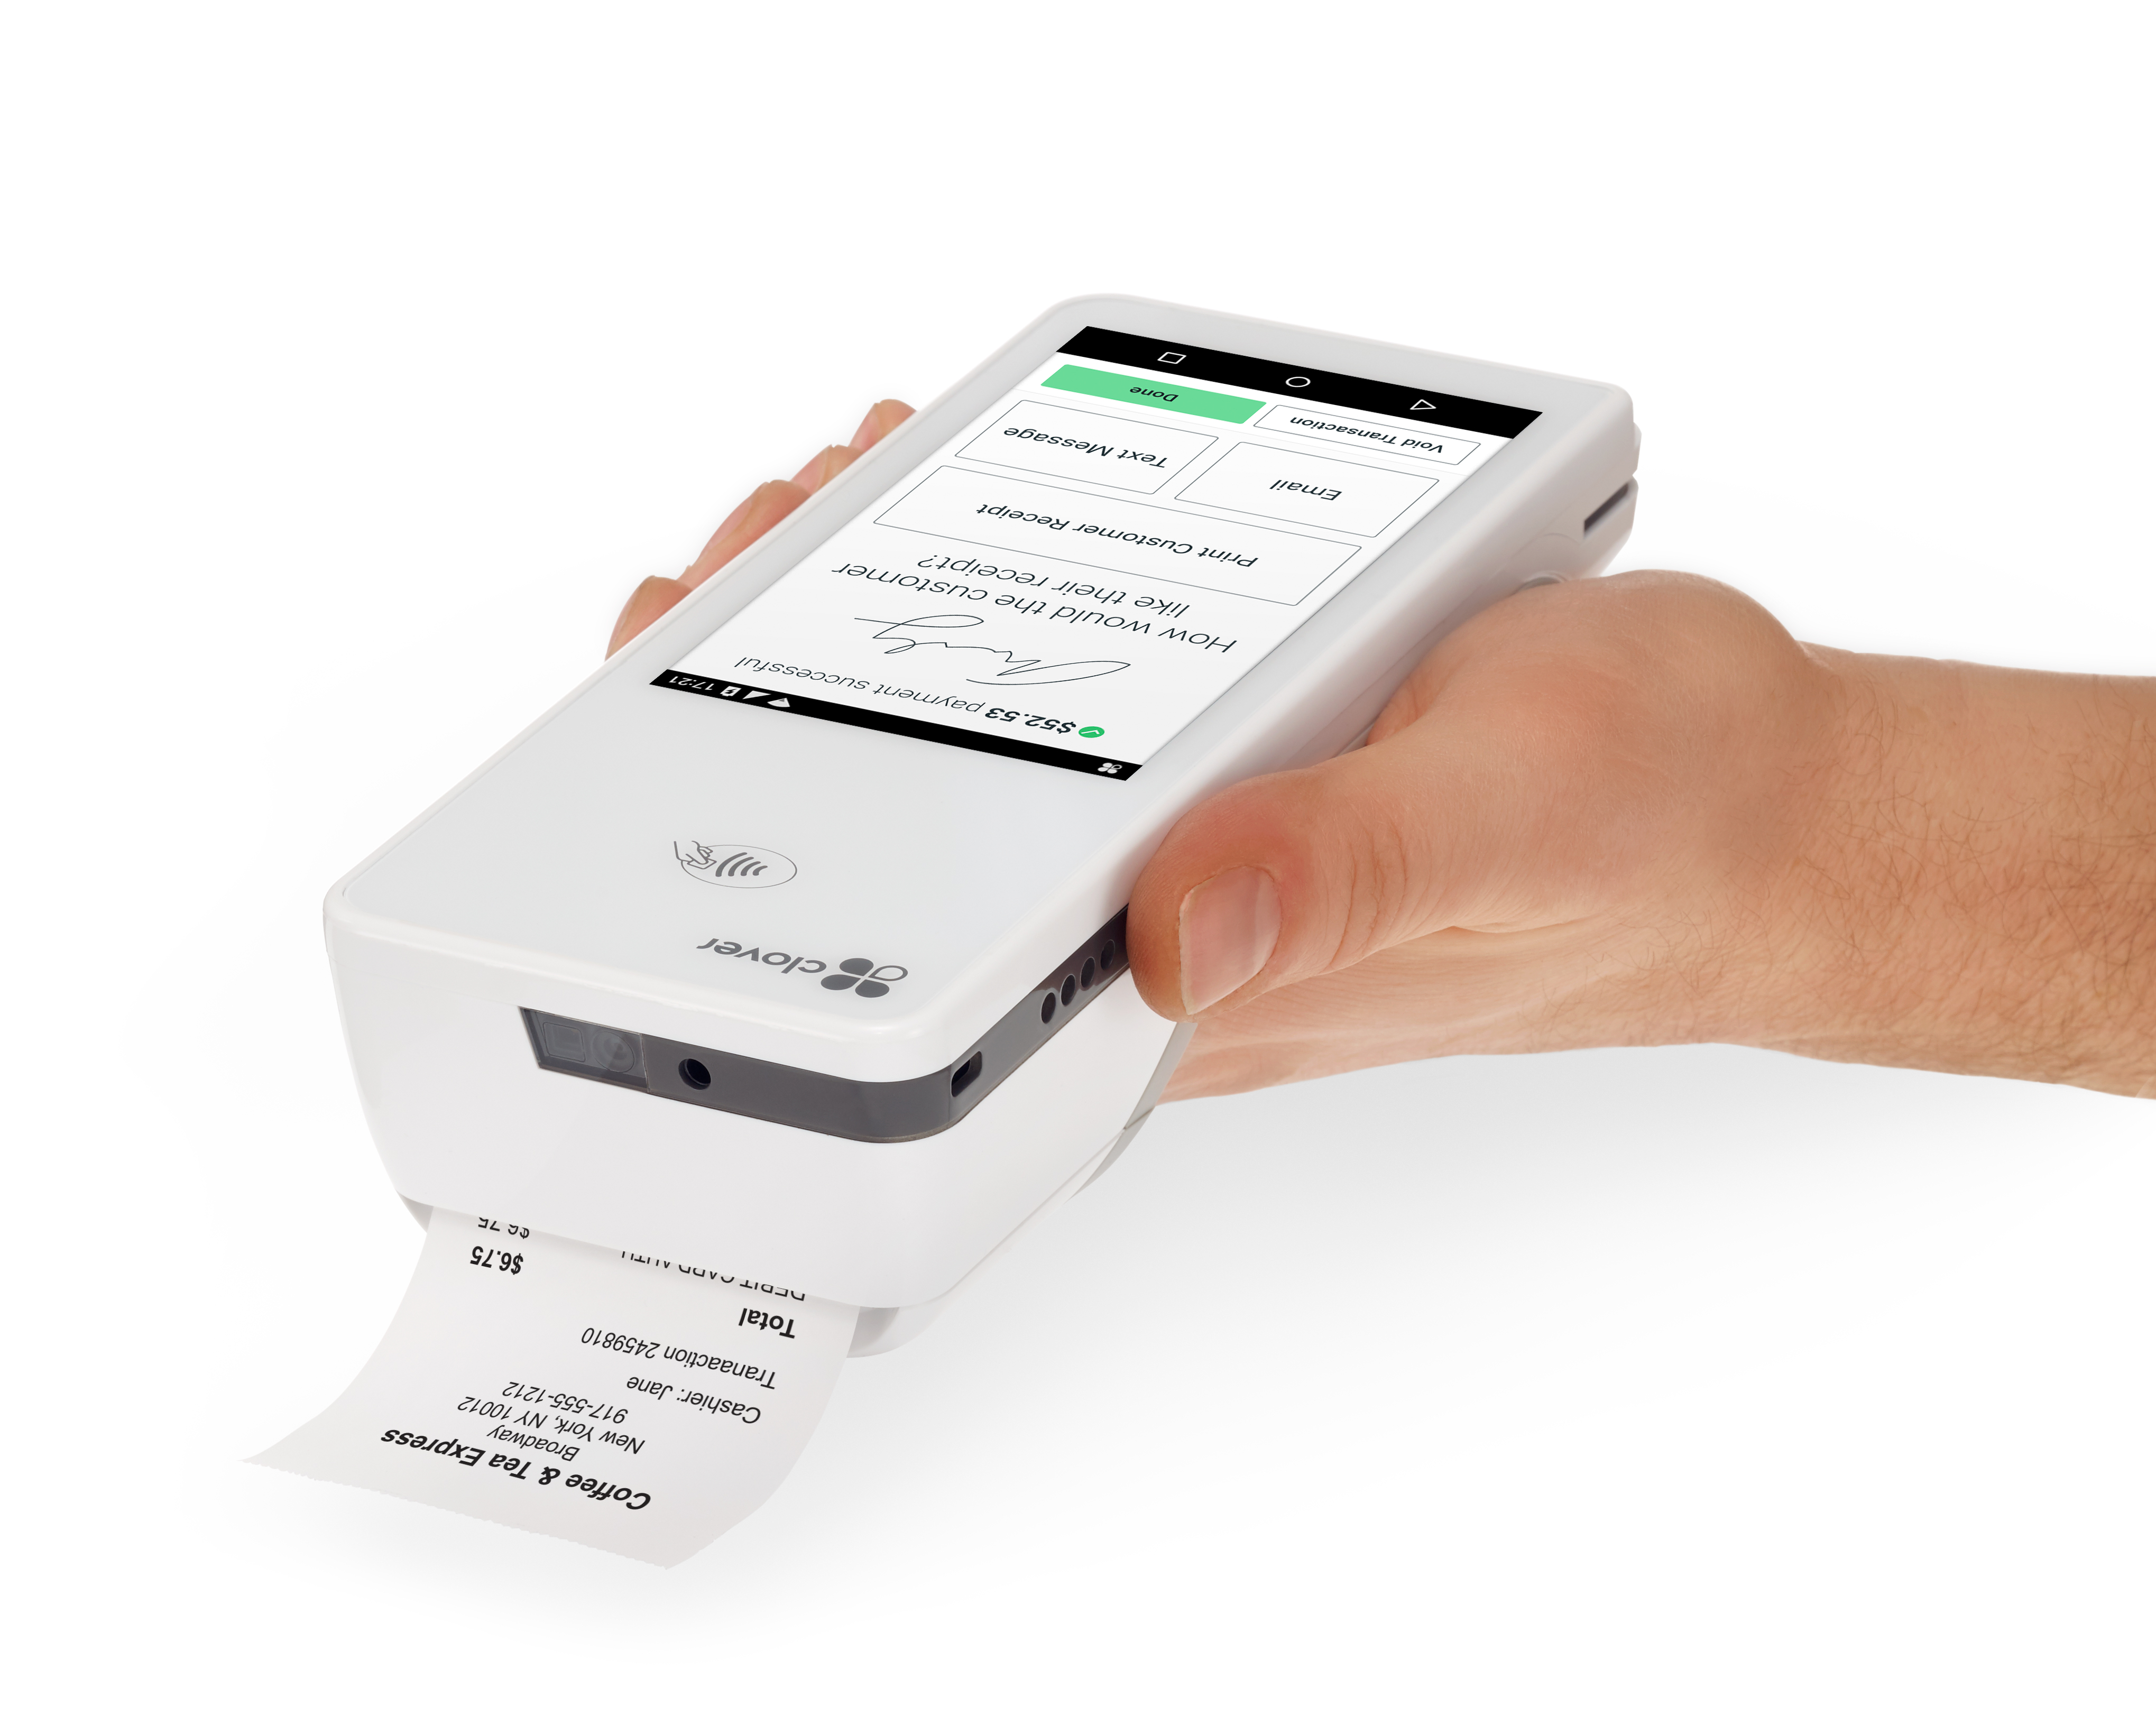 Handheld Mobile POS with Printed Receipt